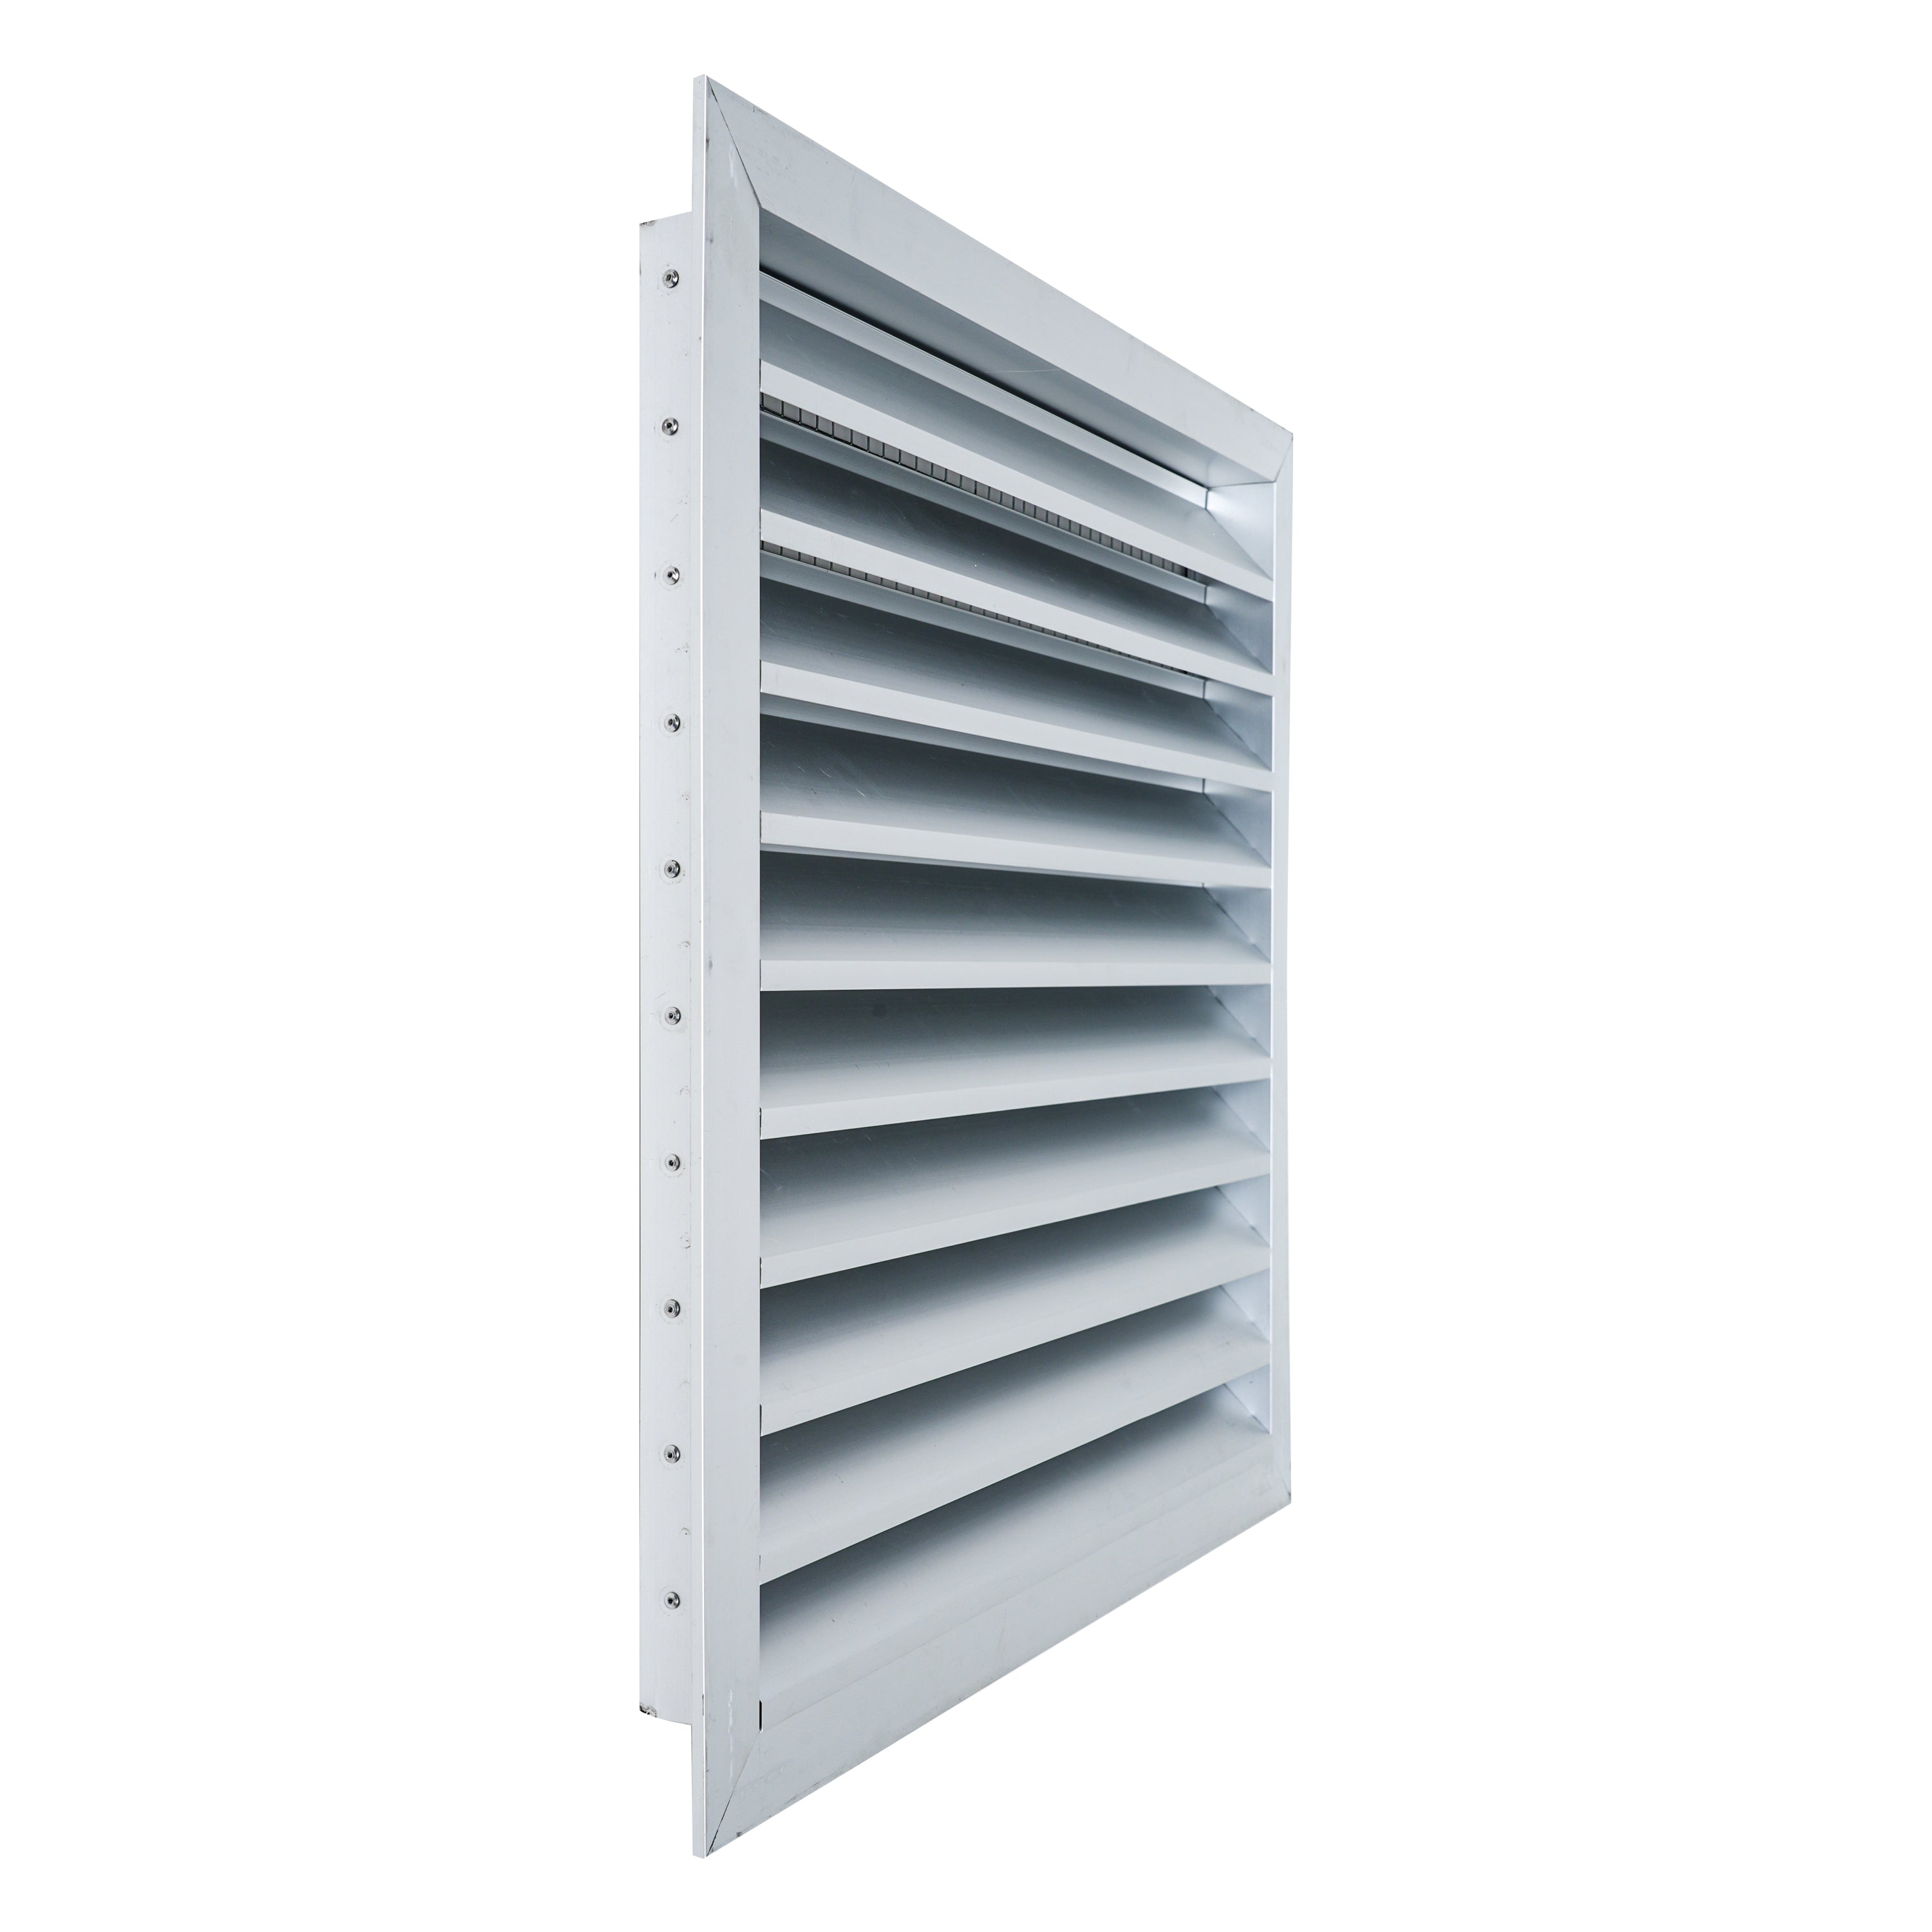 20"W x 20"H [Wall Opening] Anodized Aluminum Exterior Wall vent Gable shed for Crawlspace, Outdoor, Doors, Attic | Weatherproof, Rain&Rust Proof, Overall: 22"W X 22"H